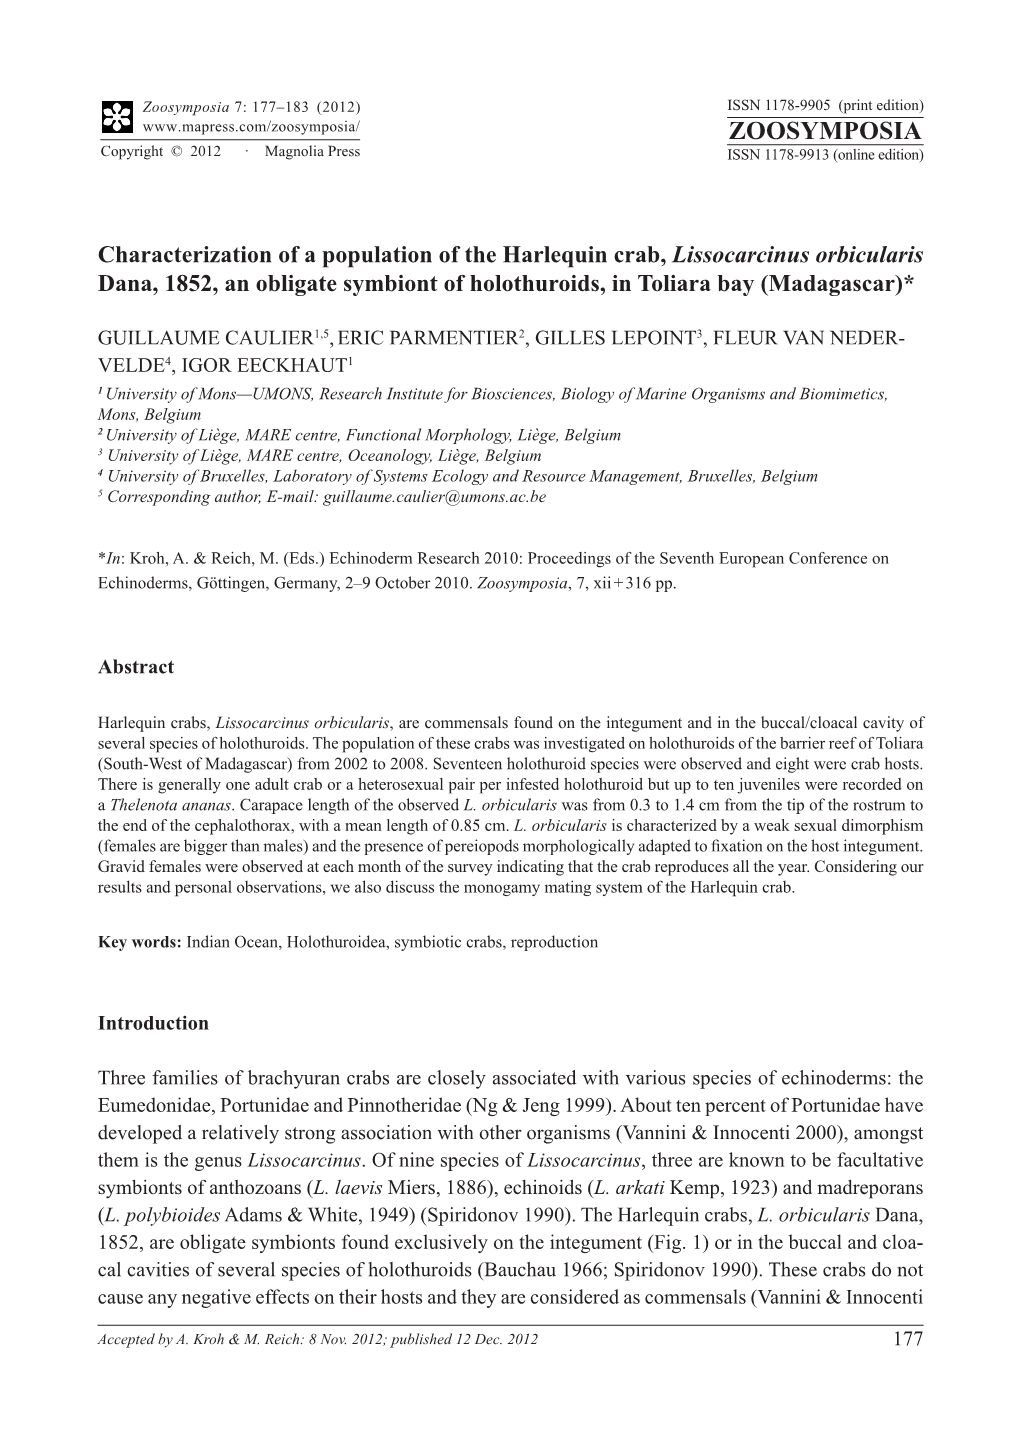 Characterization of a Population of the Harlequin Crab, Lissocarcinus Orbicularis Dana, 1852, an Obligate Symbiont of Holothuroids, in Toliara Bay (Madagascar)*